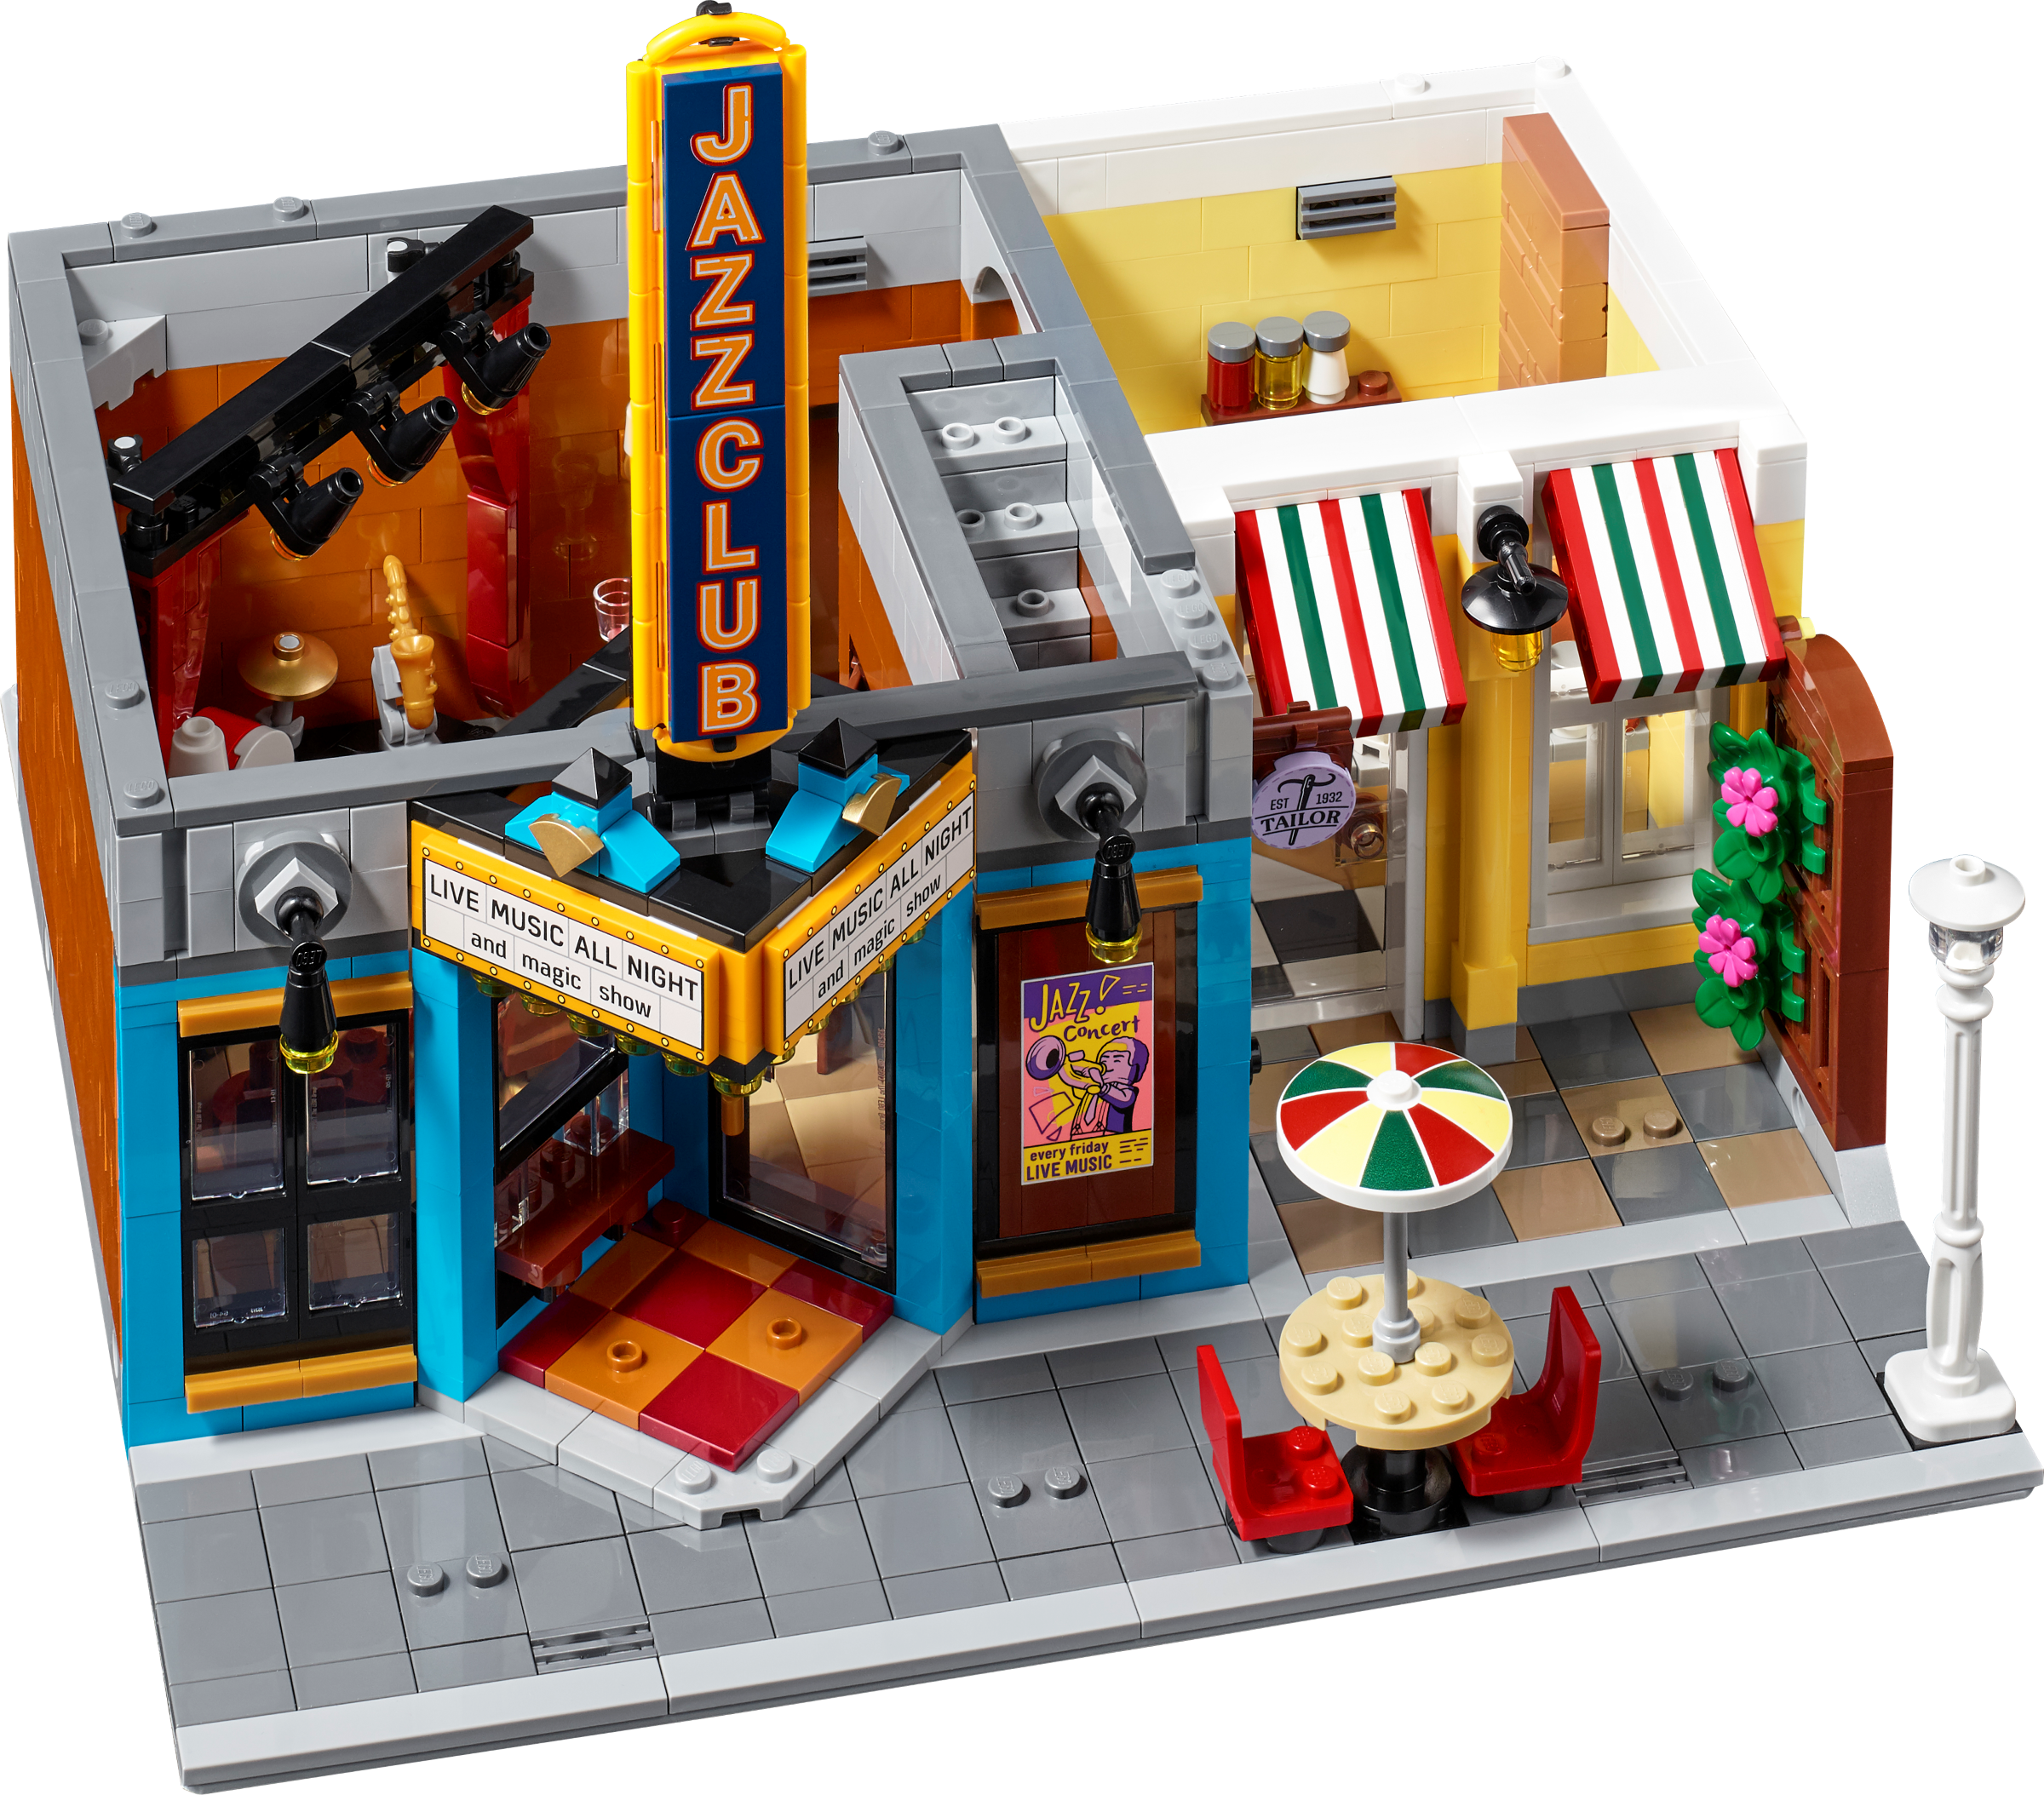 Club 10312 | LEGO® Icons | Buy online at the Official LEGO® Shop US